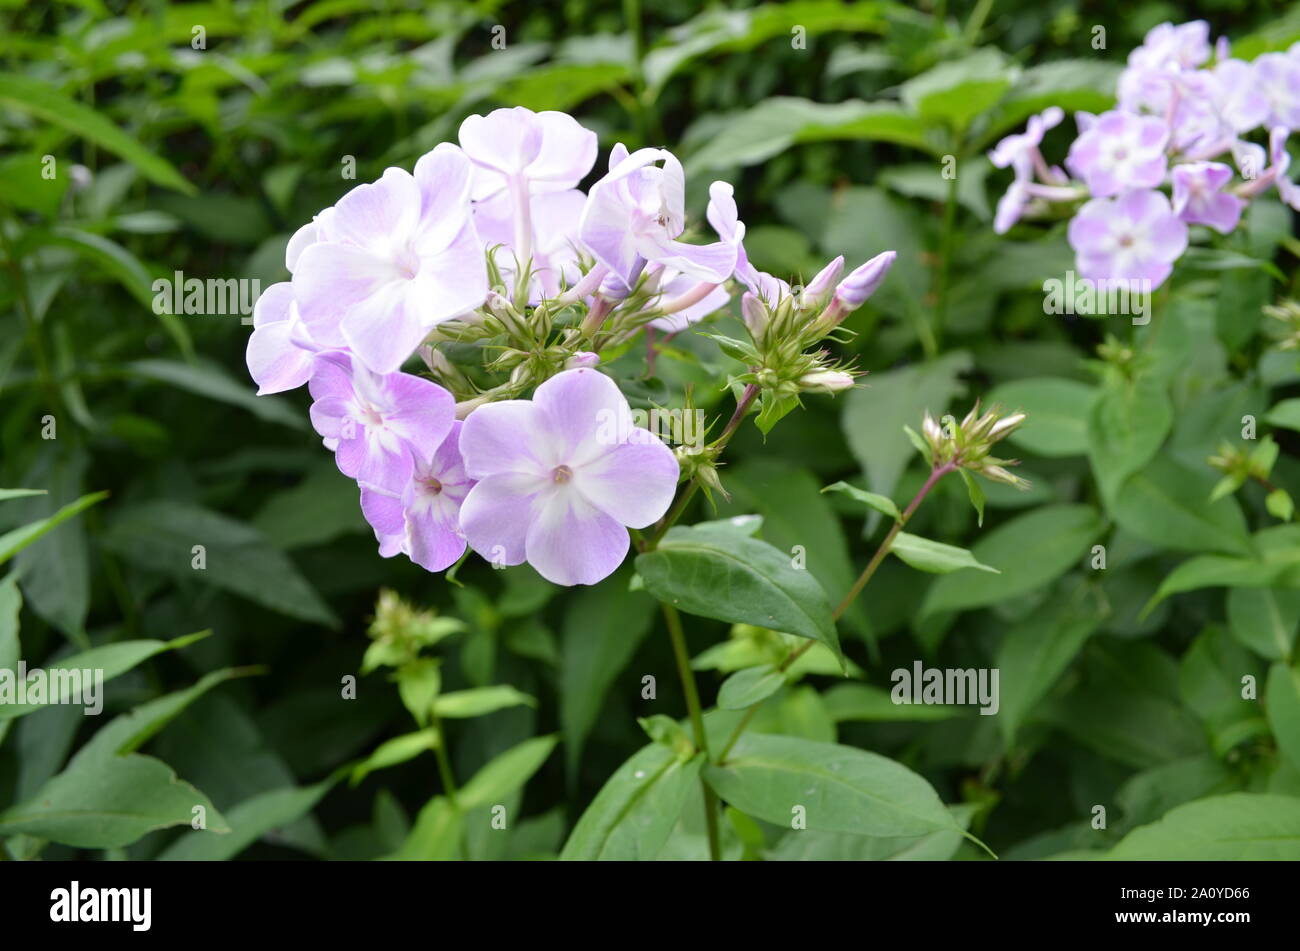 Summertime in Massachusetts: Close-up of Purple Phlox Flowers in Bloom Stock Photo